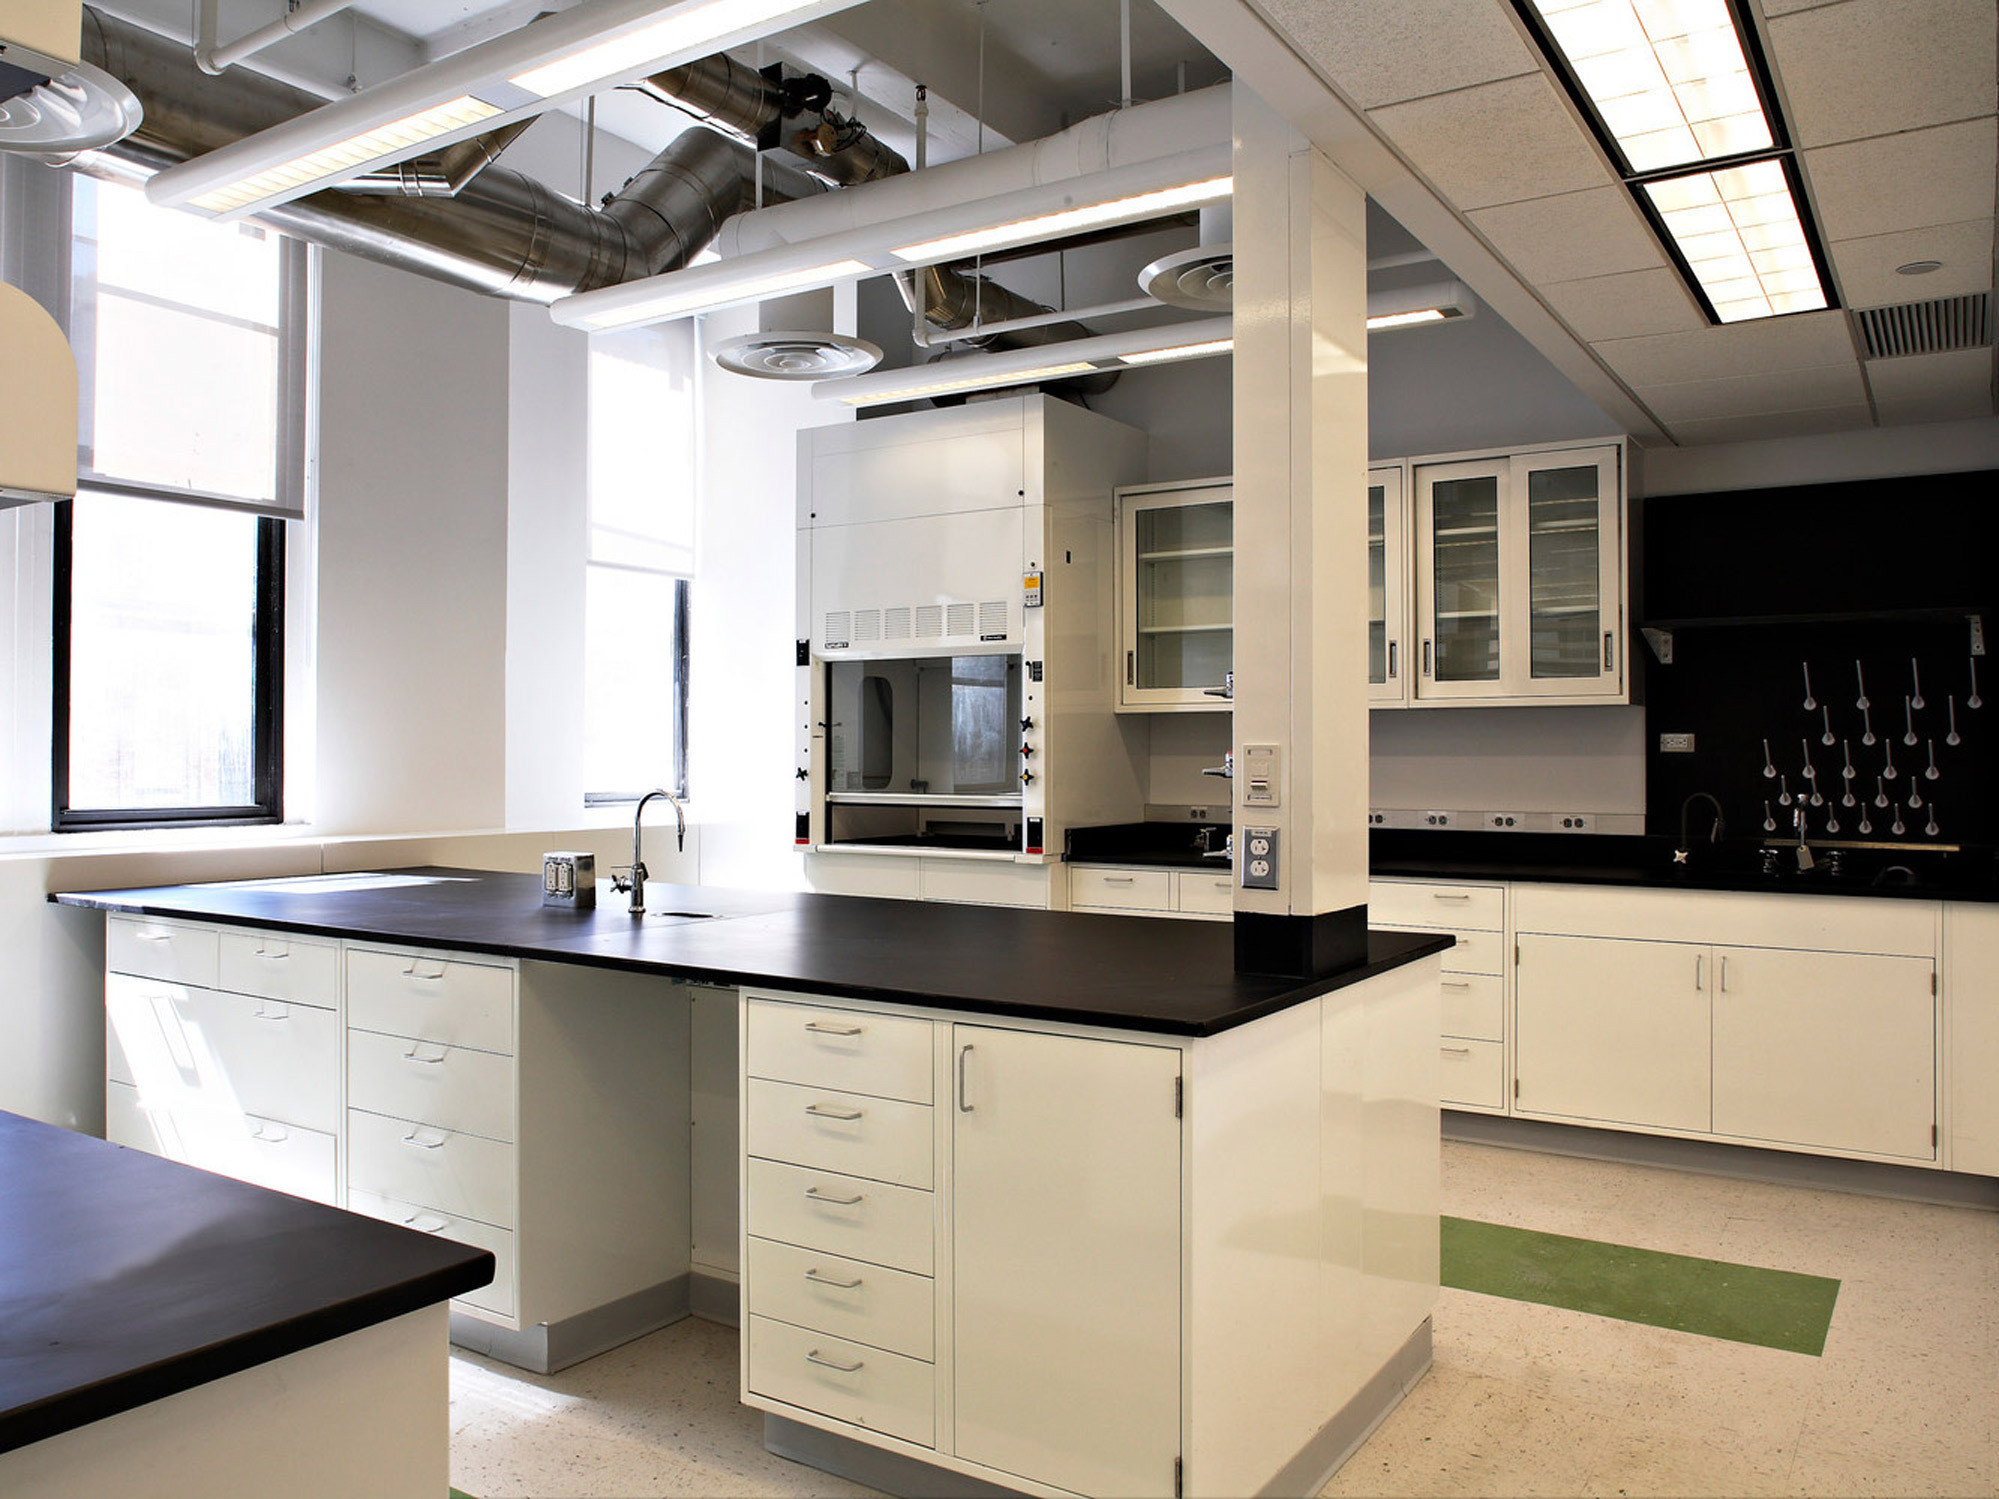 Modern laboratory interior with clean lines, featuring white cabinetry and a sleek black countertop. Overhead, exposed ductwork adds an industrial touch, while track lighting ensures a well-lit workspace. Green floor markings guide safety paths.